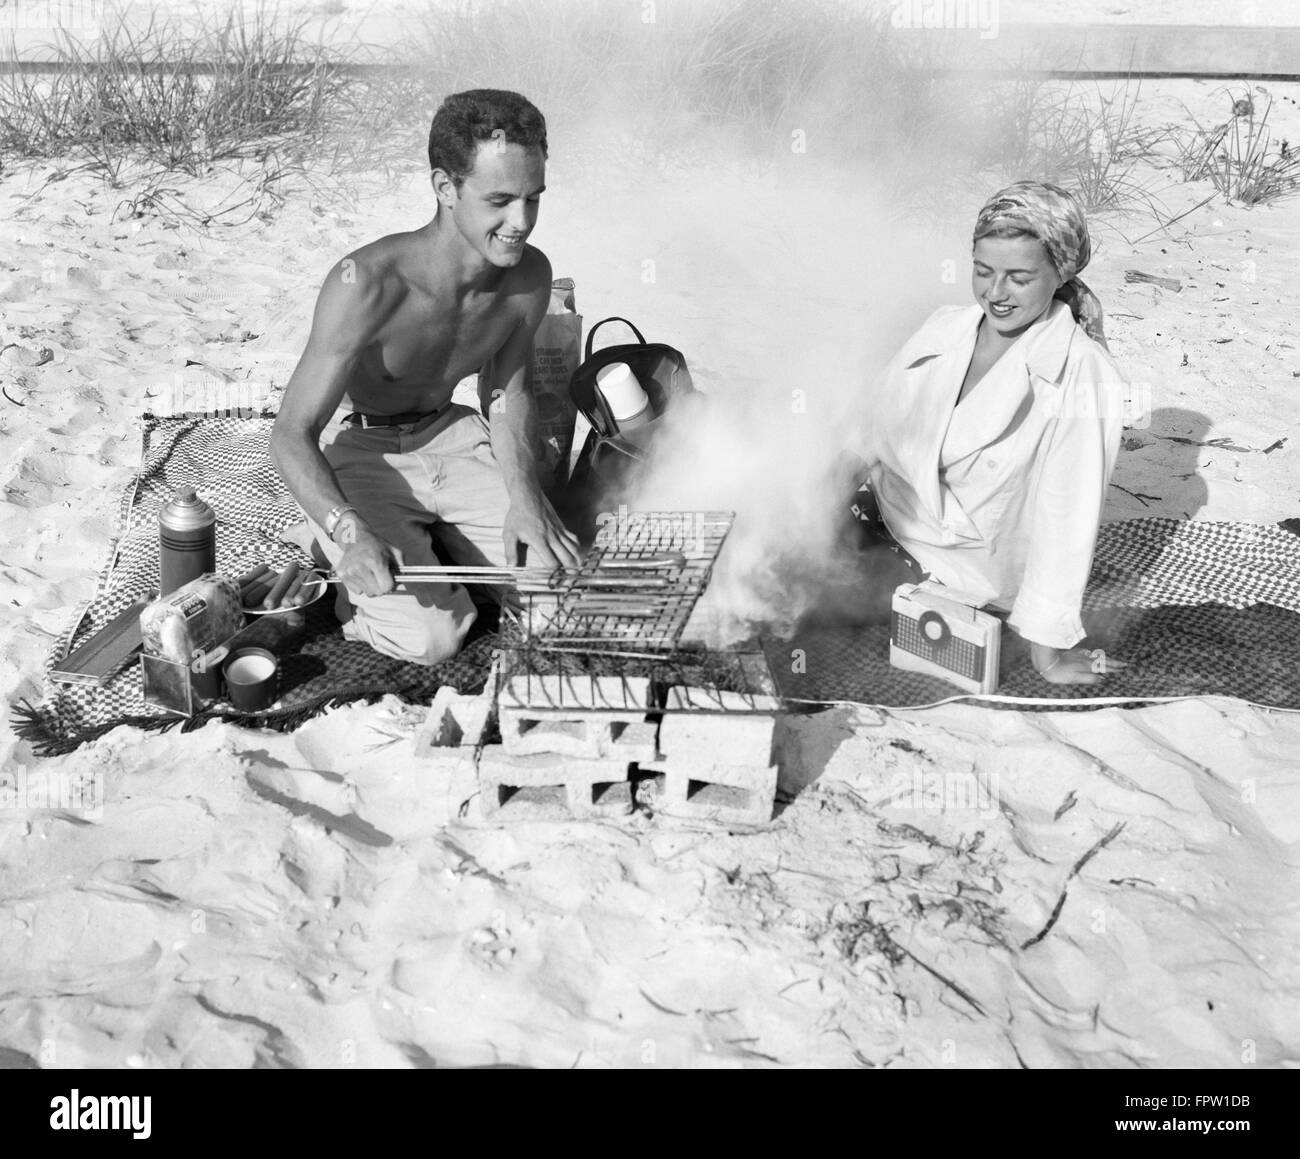 1940s COUPLE HAVING PICNIC ON BEACH MAN GRILLING HOT DOGS Stock Photo